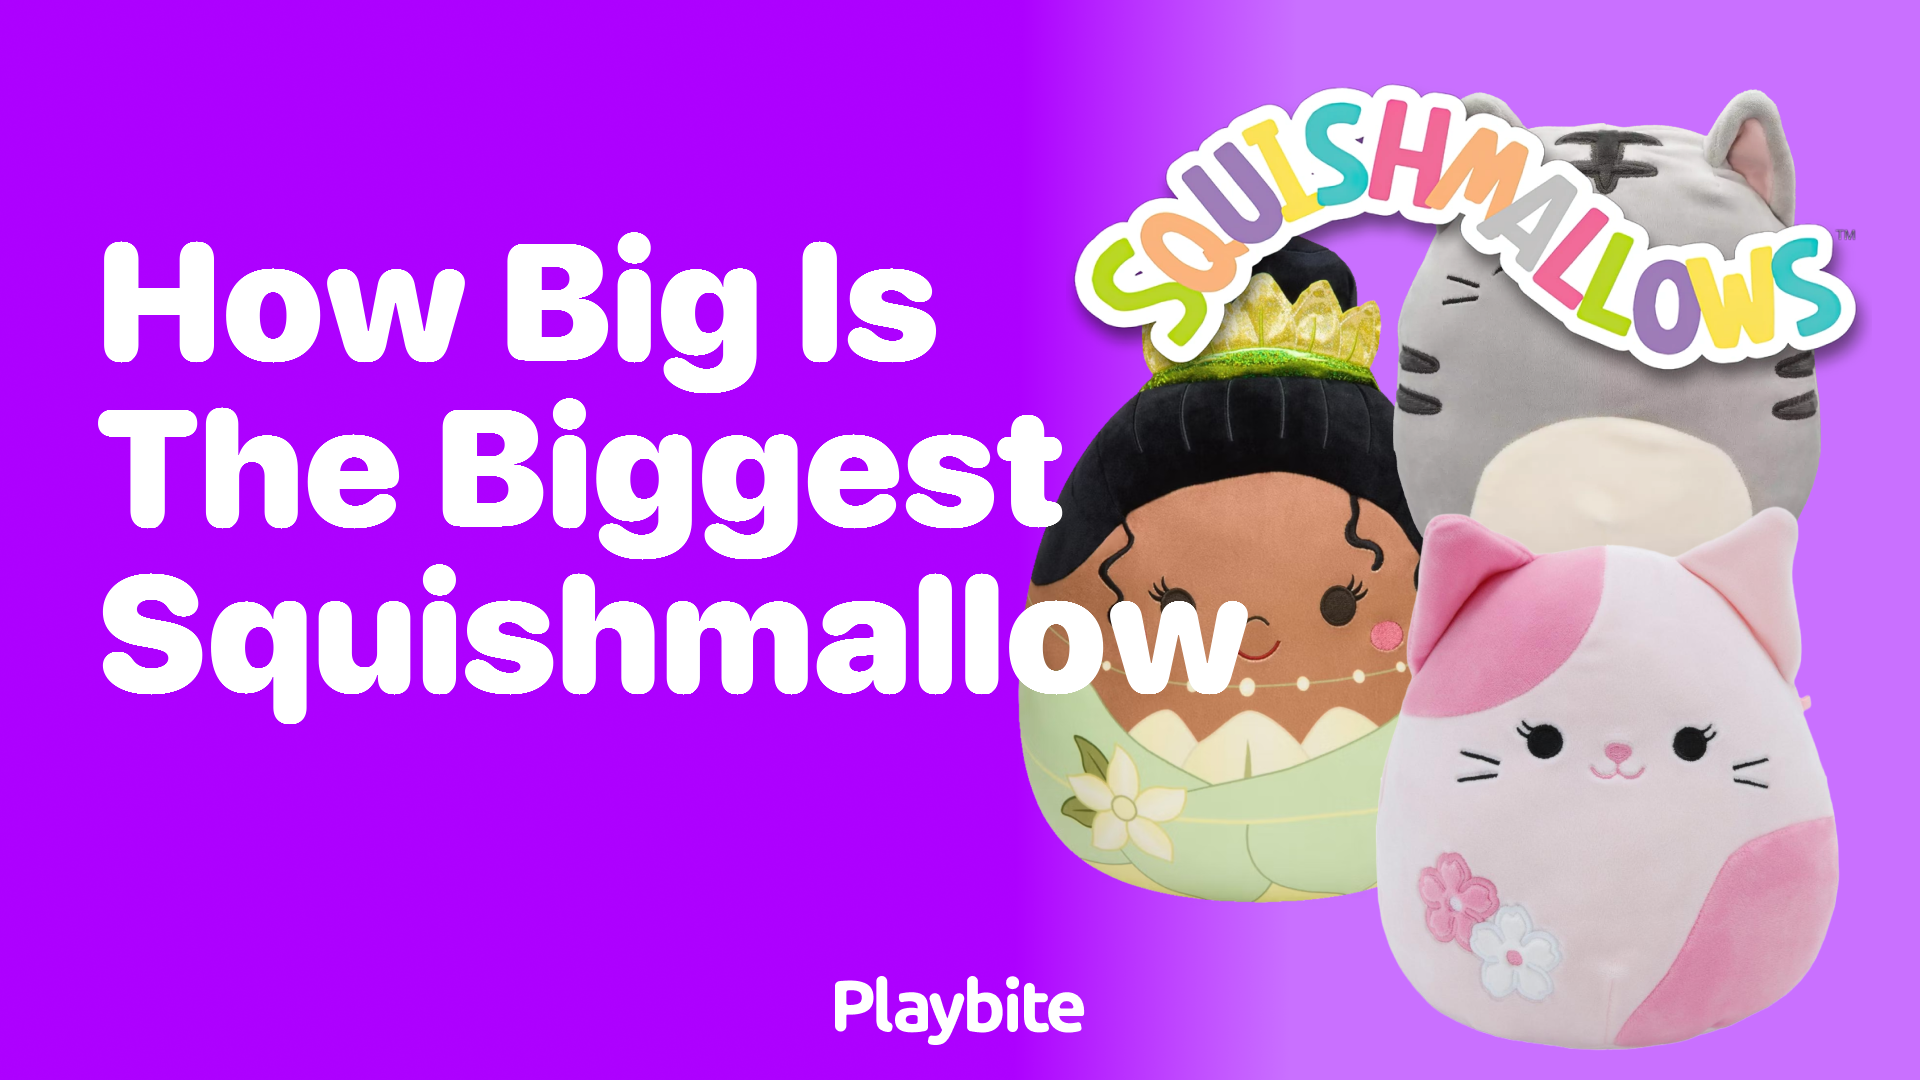 How Big is the Biggest Squishmallow? Discover the Giant Squish! - Playbite